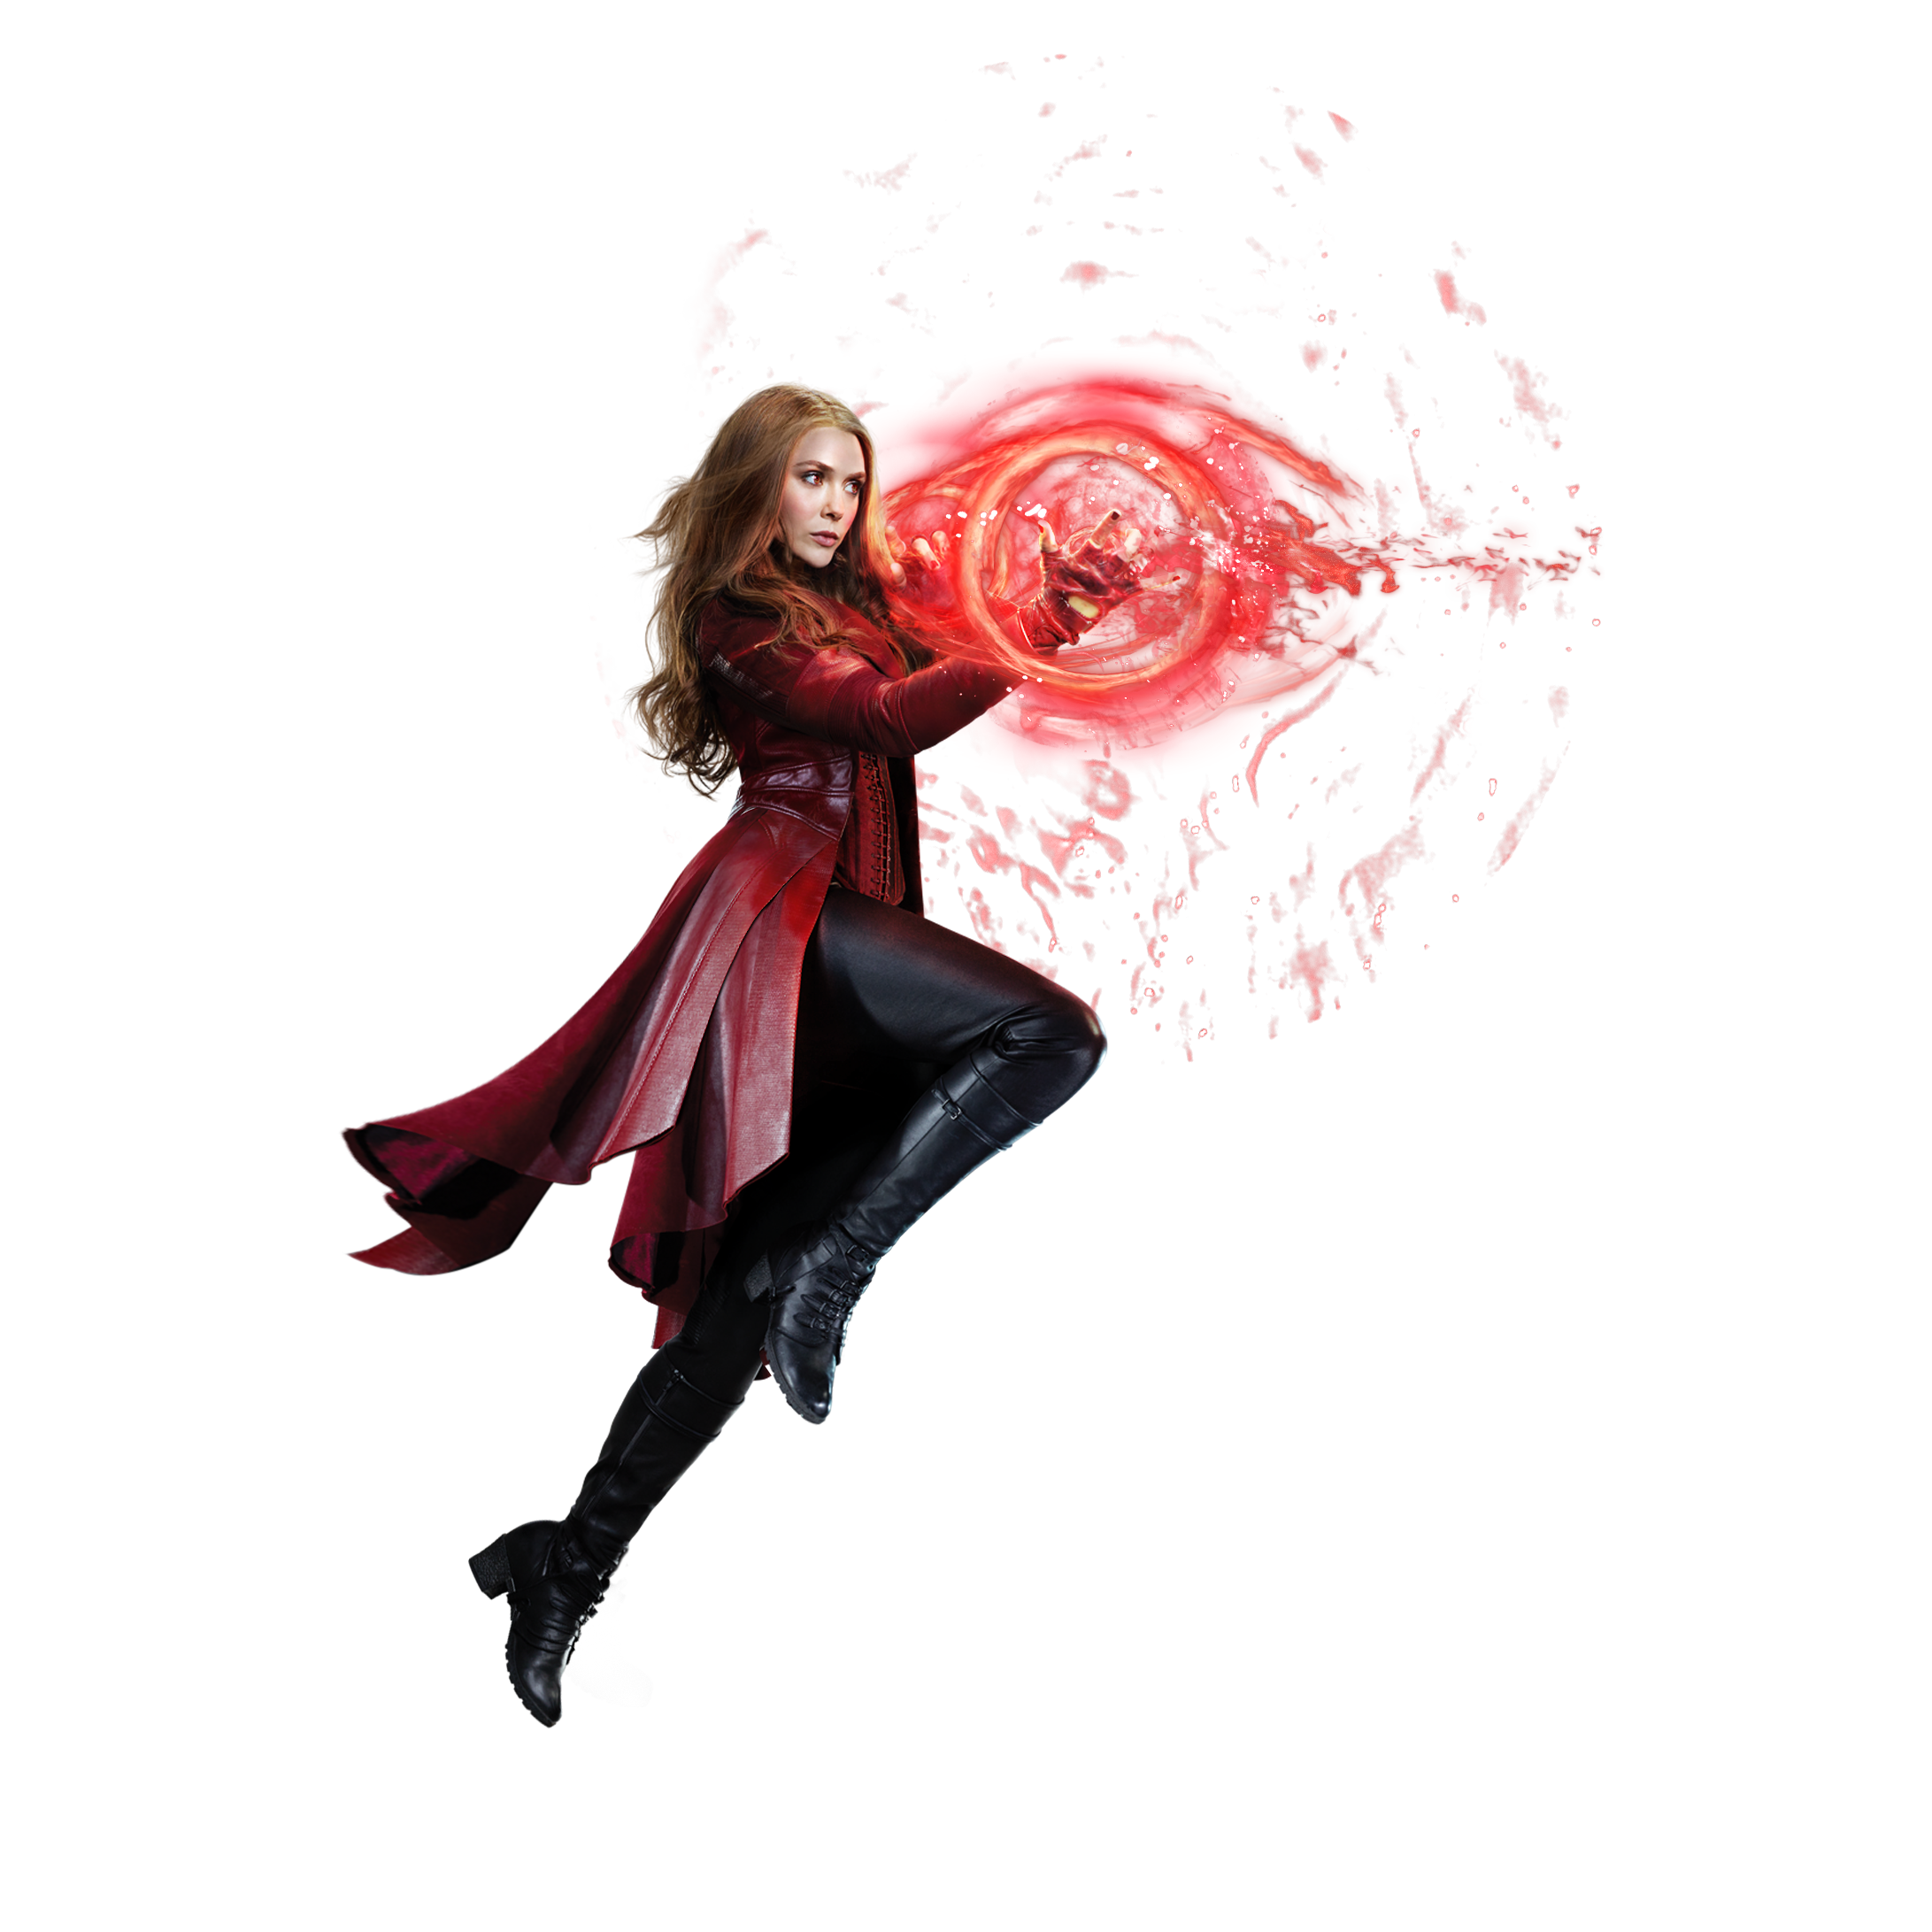 ScarletWitch.png